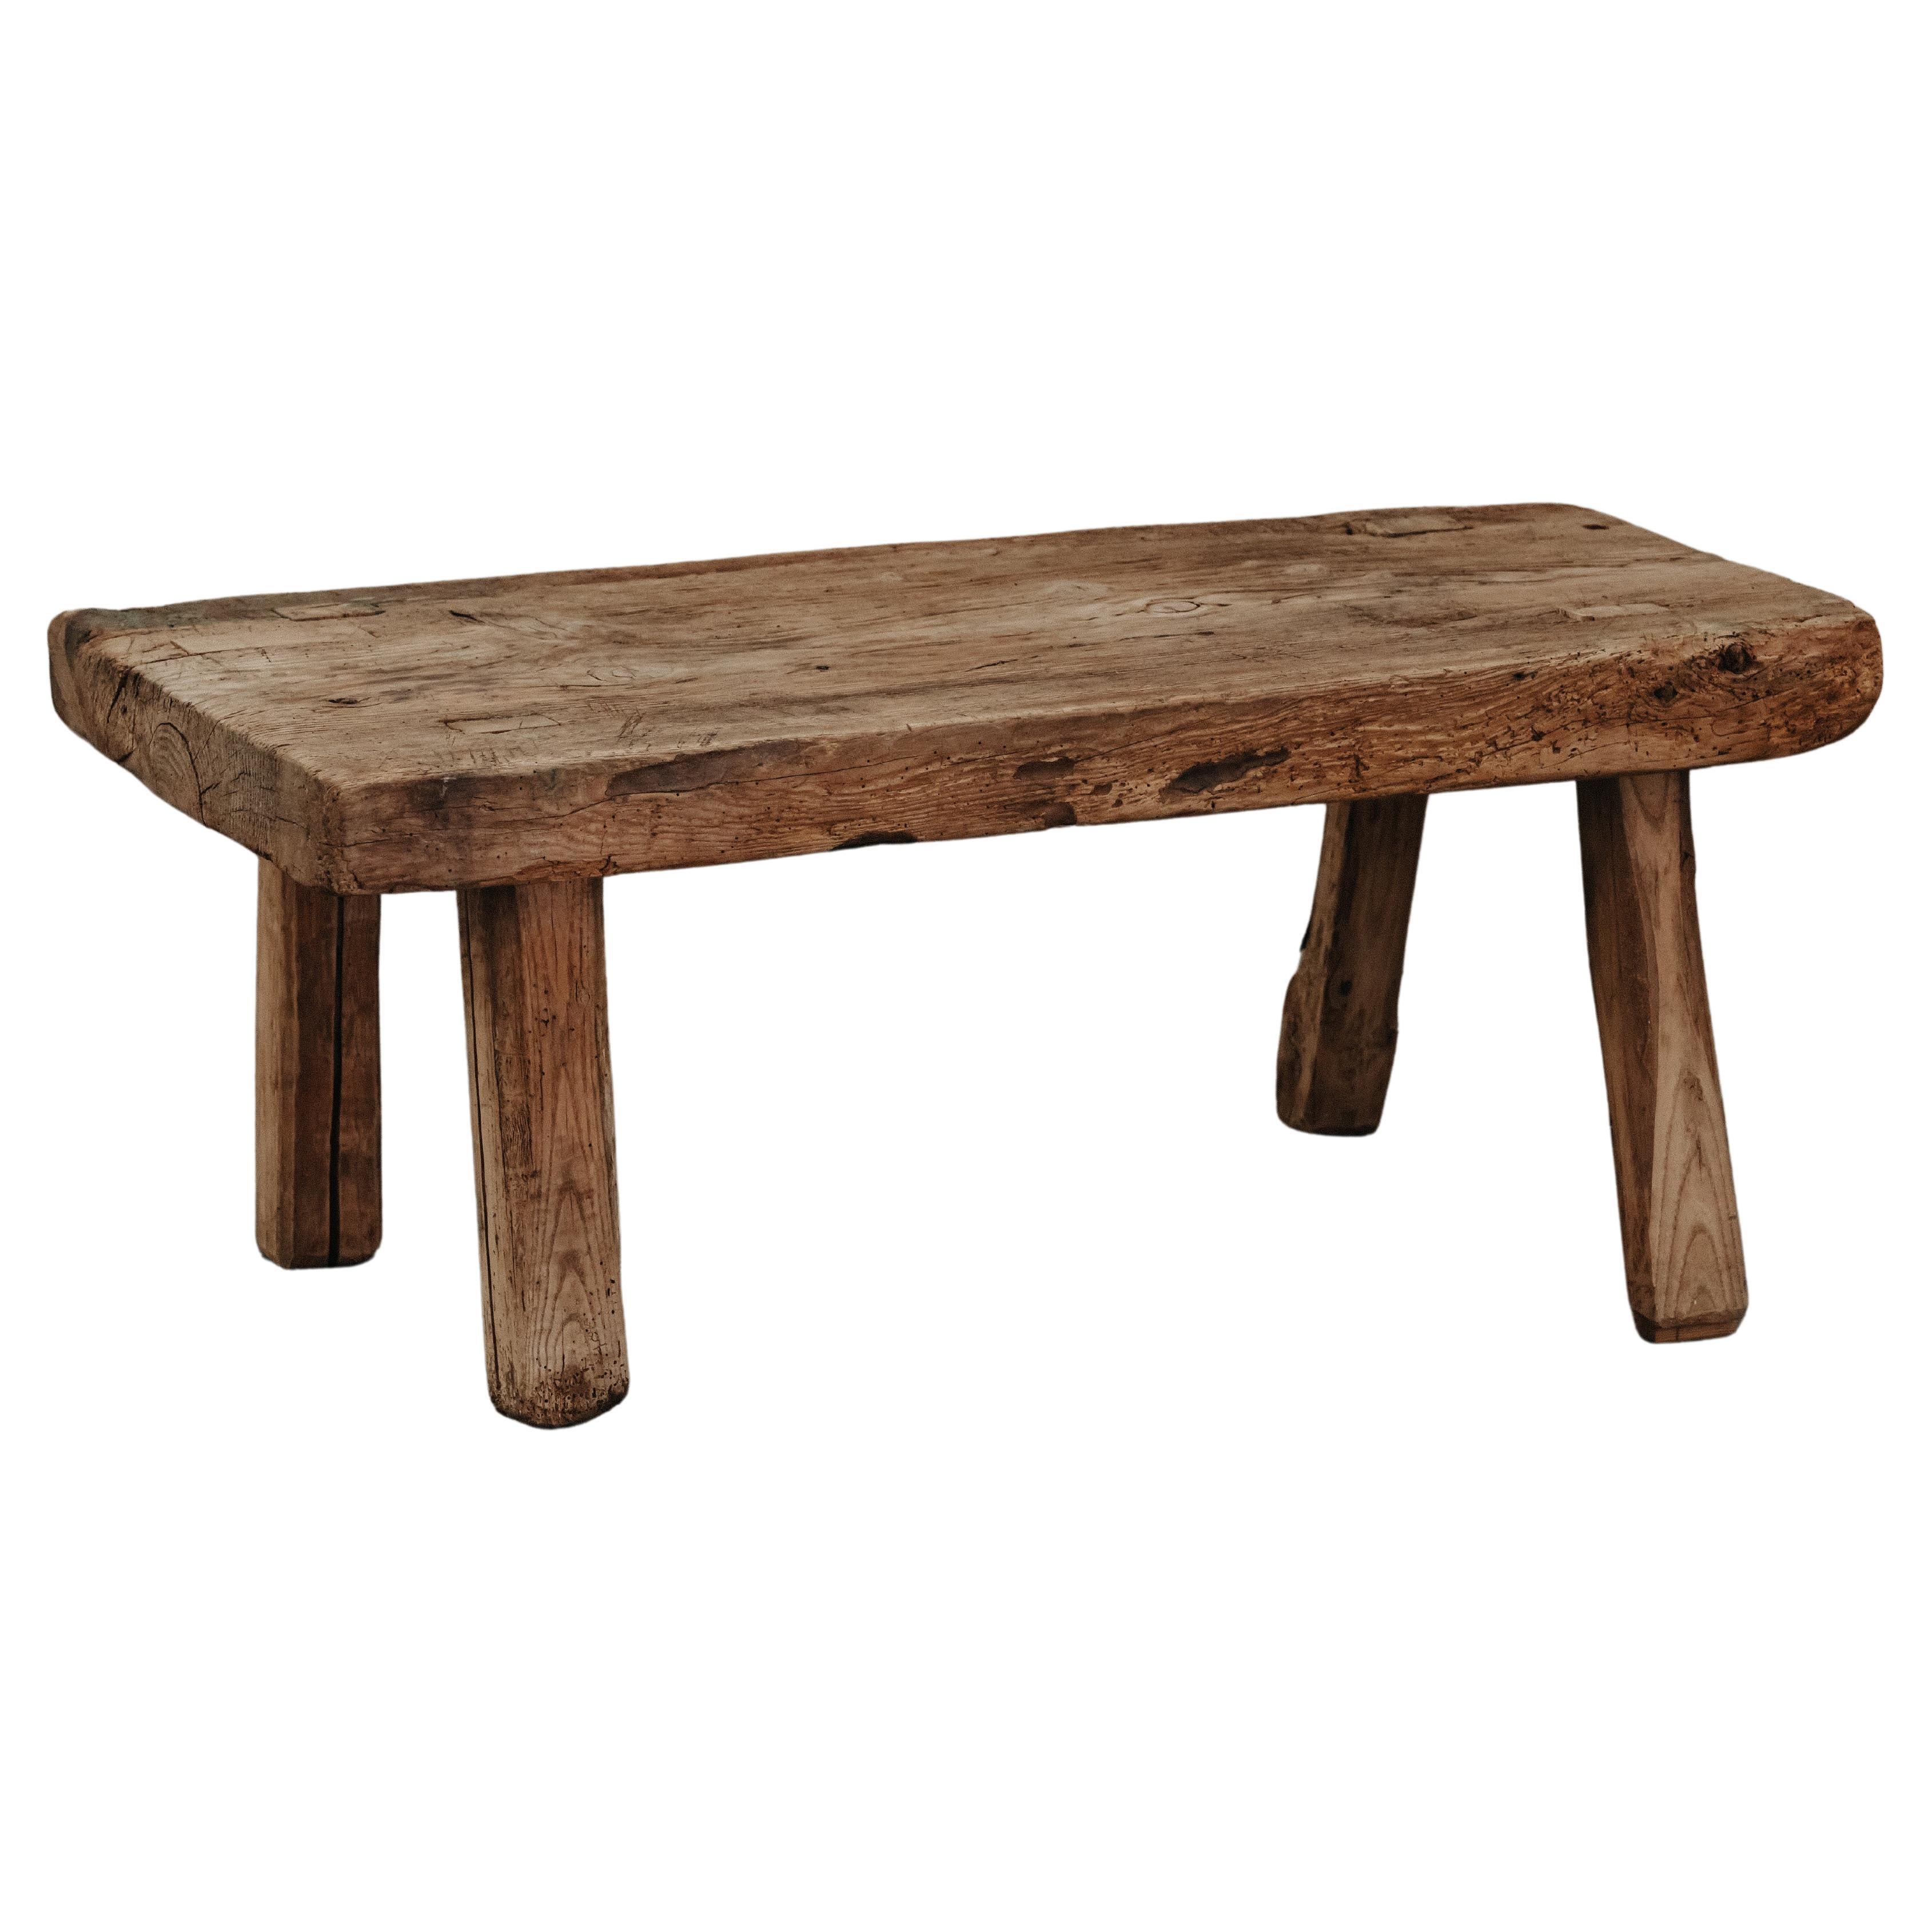 Primitive Pine Coffee Table From France, Circa 1850 For Sale